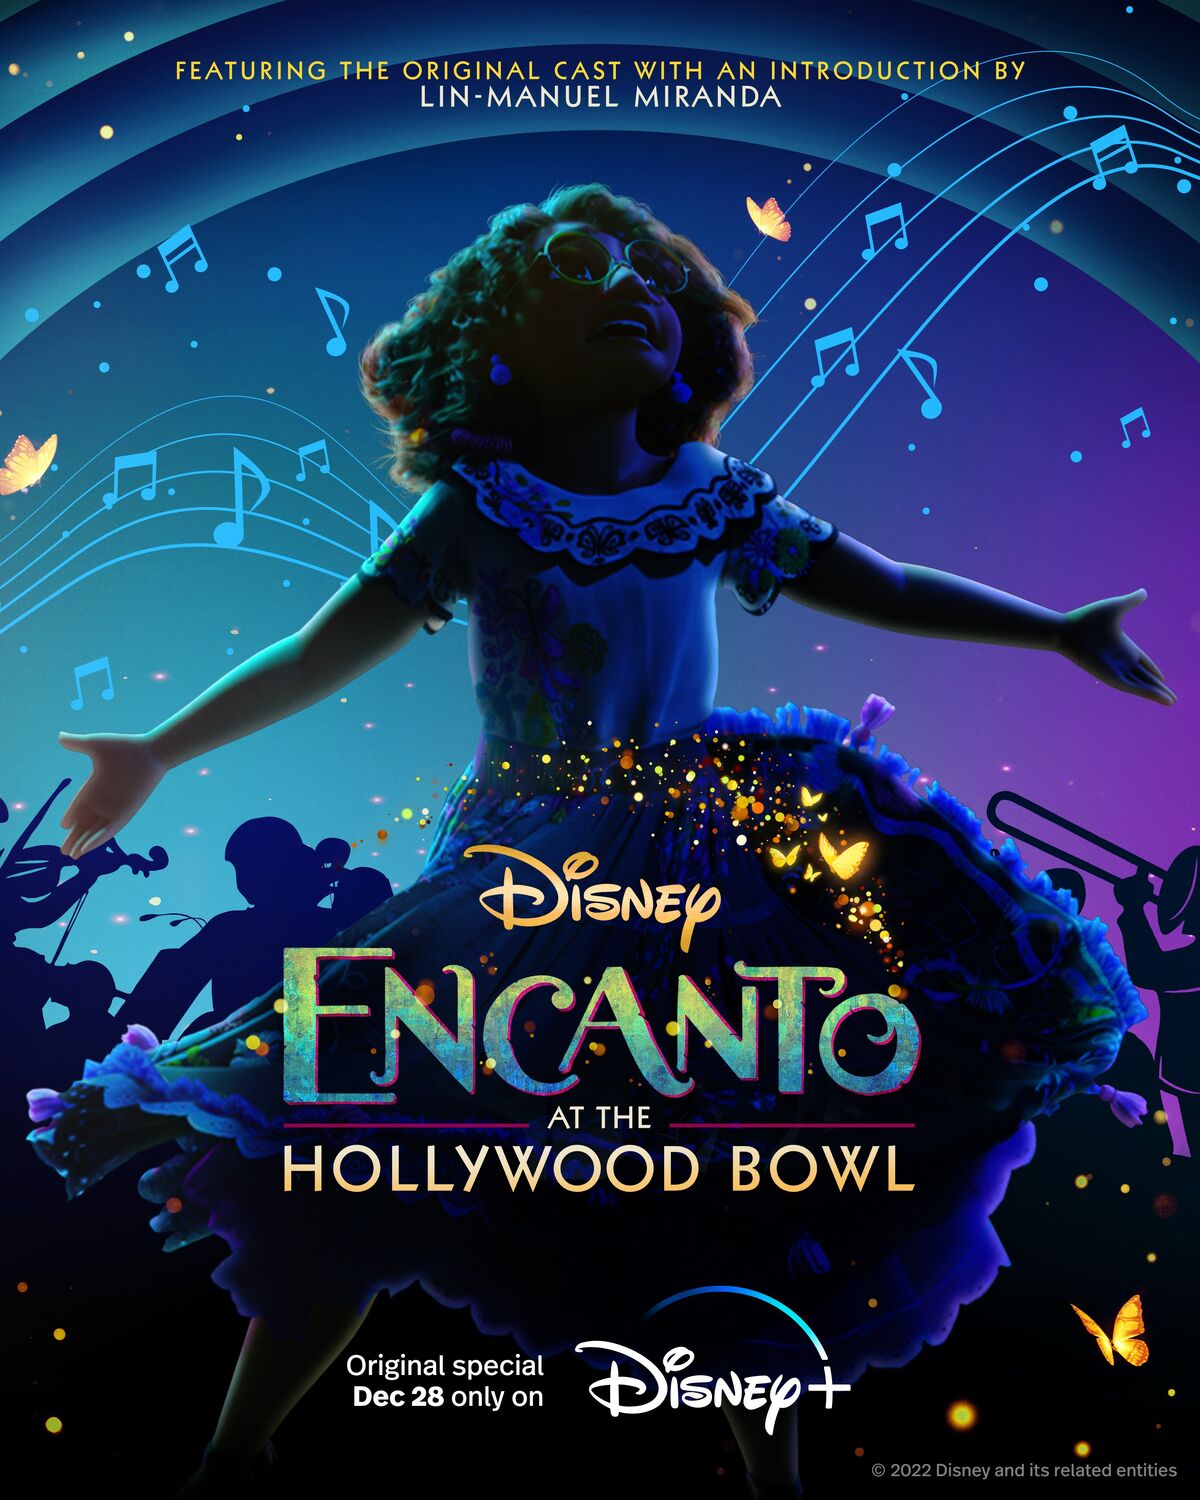 https://static.wikia.nocookie.net/disney/images/d/dd/Encanto_at_the_Hollywood_Bowl_poster.jpg/revision/latest/scale-to-width-down/1200?cb=20221215192415